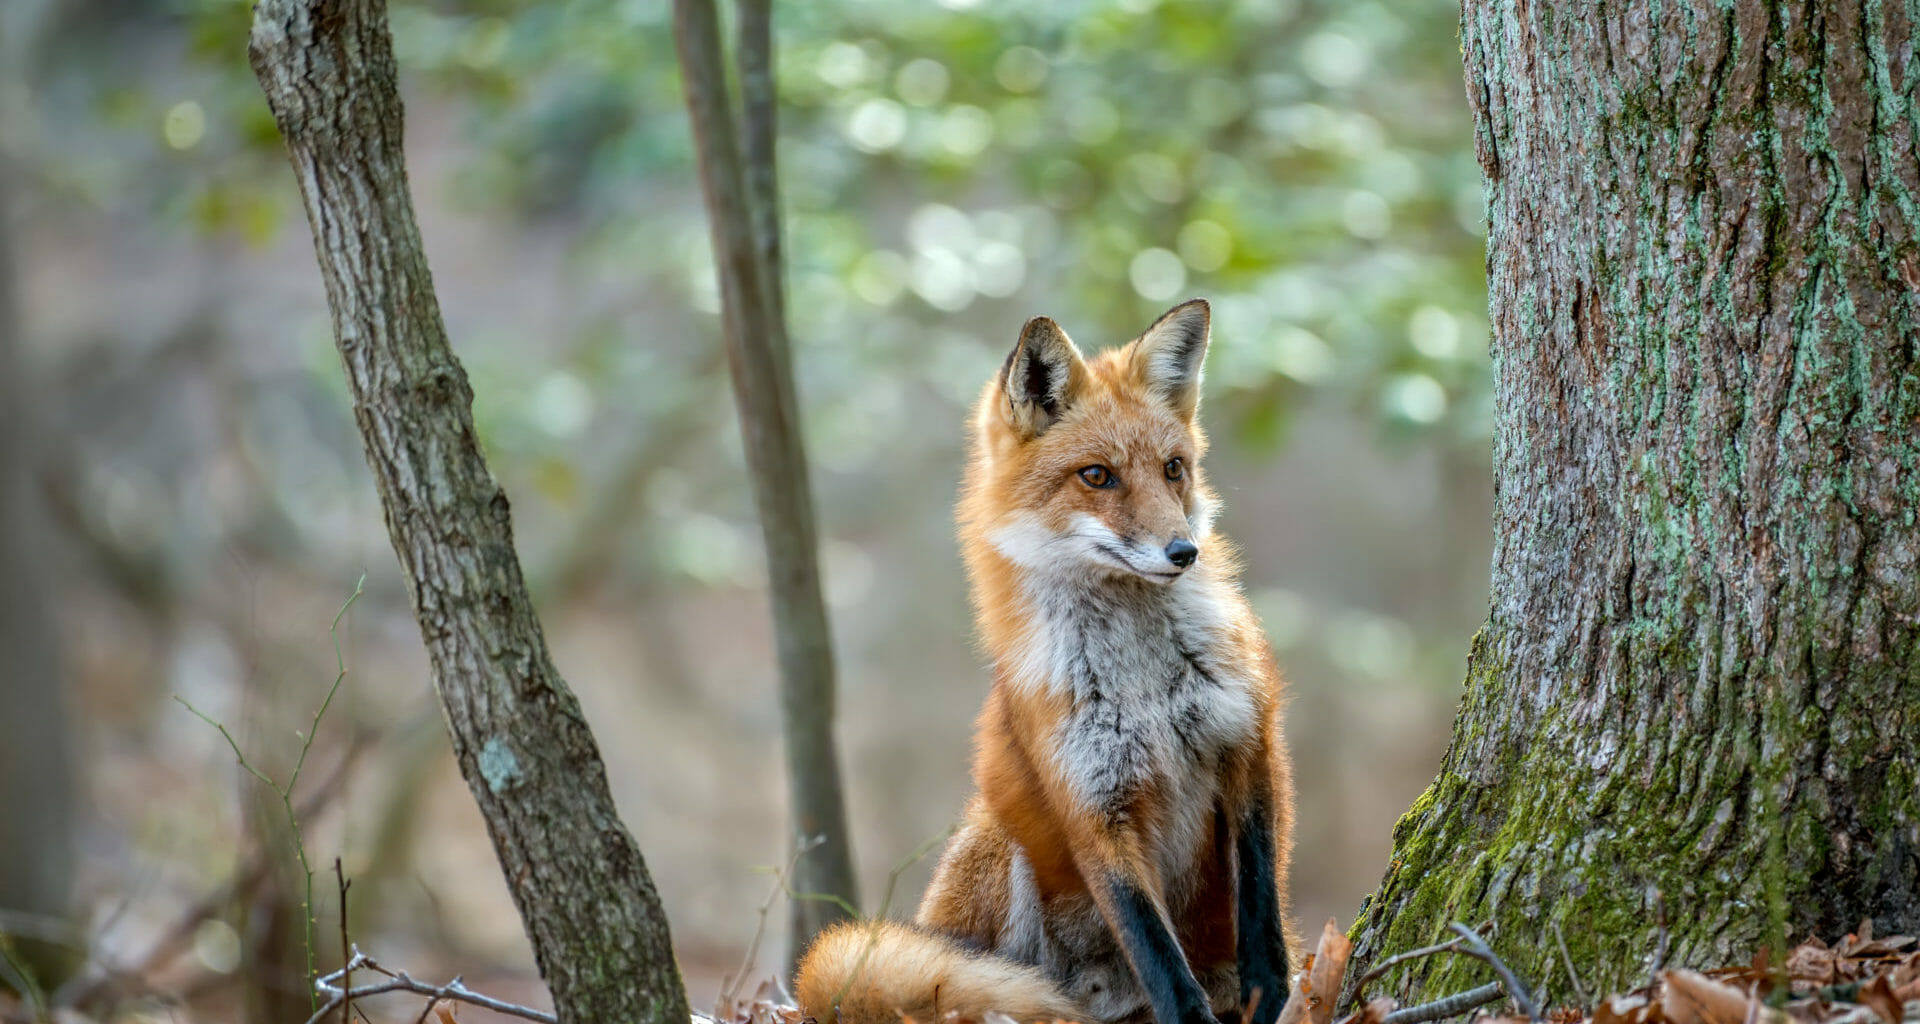 Animal charity urges ministers to enact plans for tighter fox hunting law after huntsman convicted 1